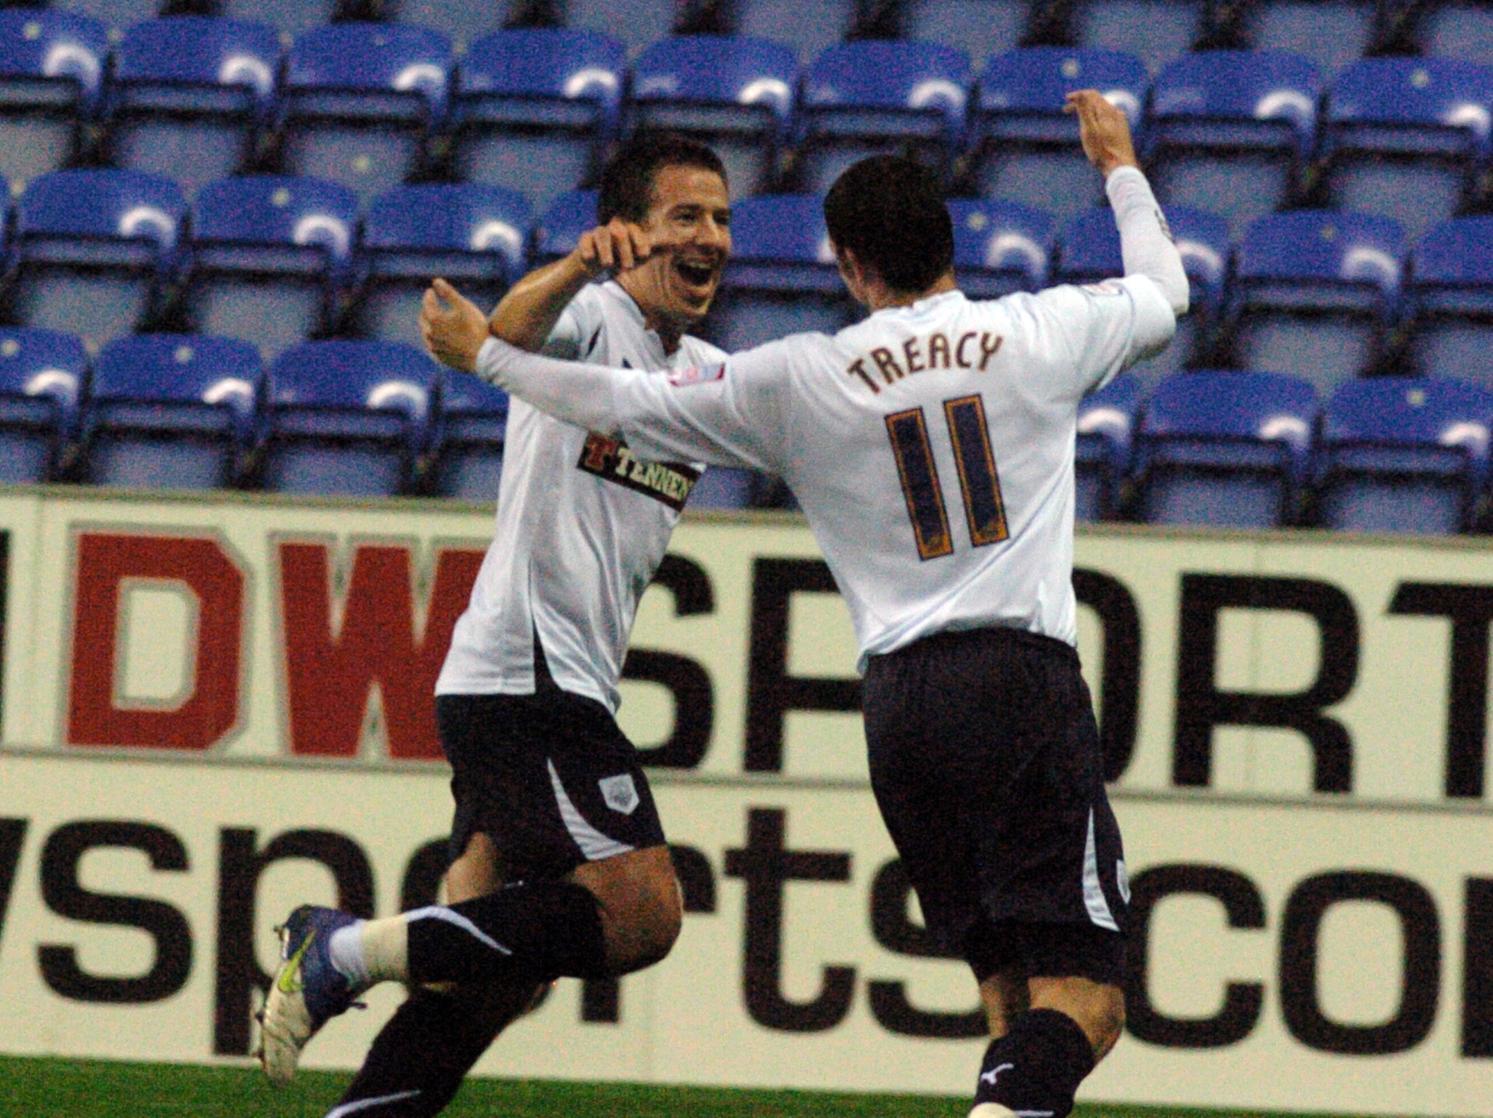 Keith Tracey celebrates with Sean St Ledger after scoring for PNE at Wigan in the Carling Cup in September 2010 - Wigan hit back to win the game 2-1